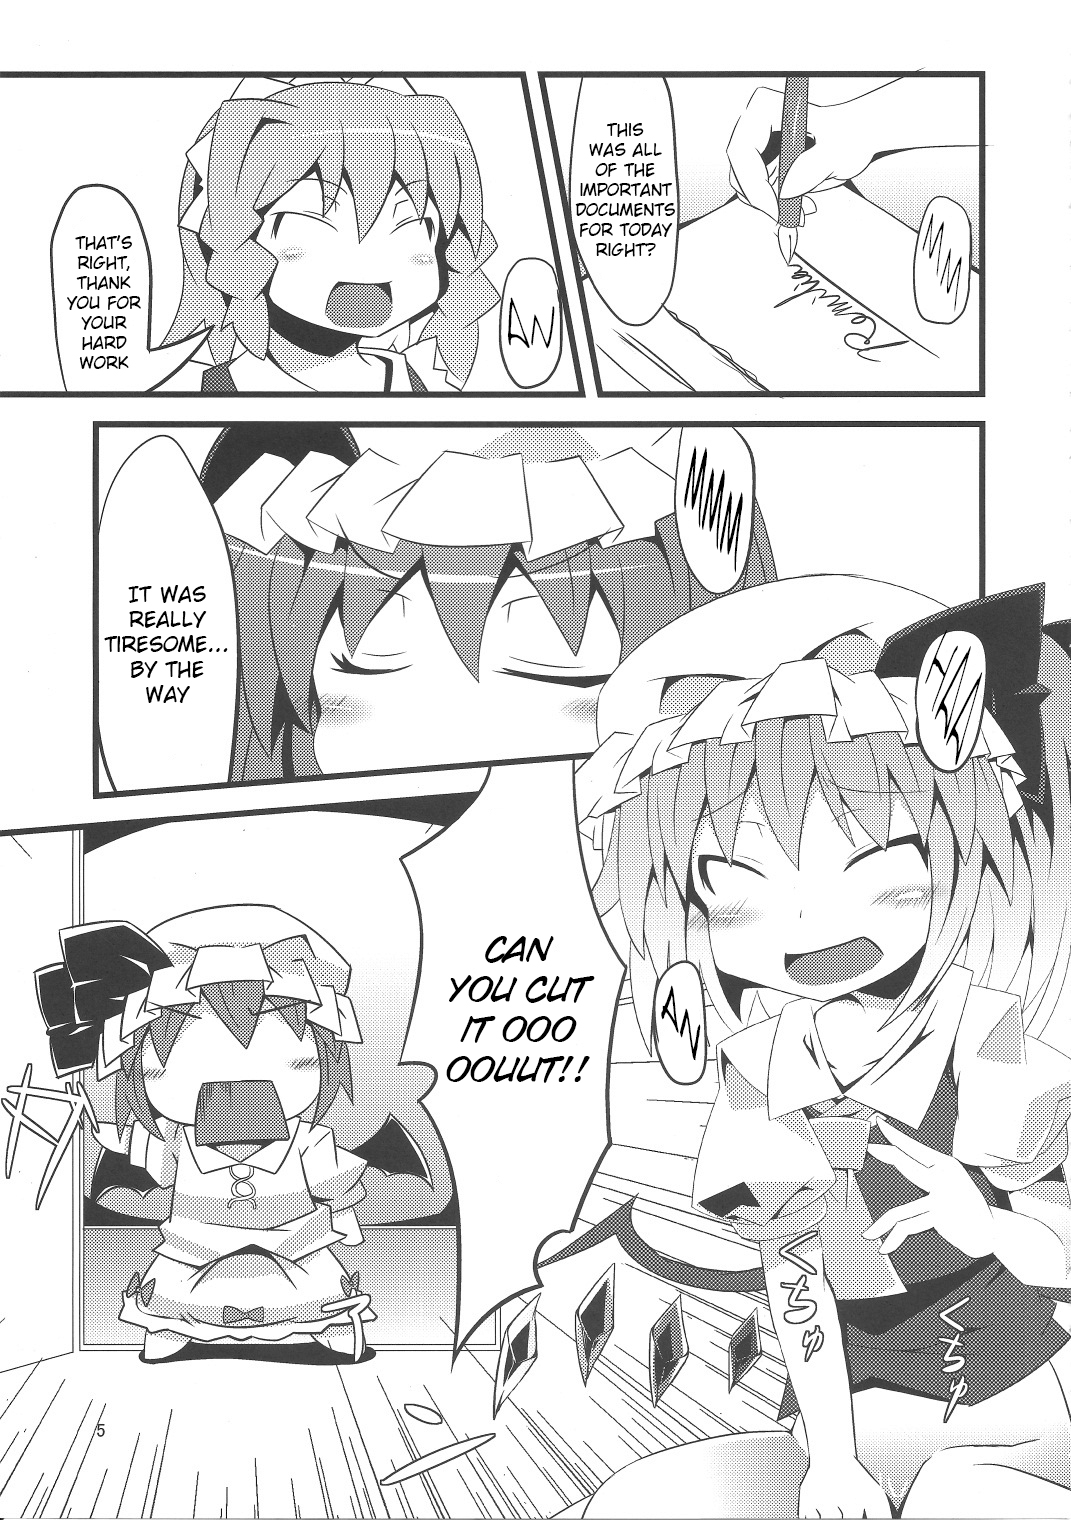 (Kouroumu 7) [Angelic Feather (Land Sale)] Tentacle Play (Touhou Project) [English] page 4 full